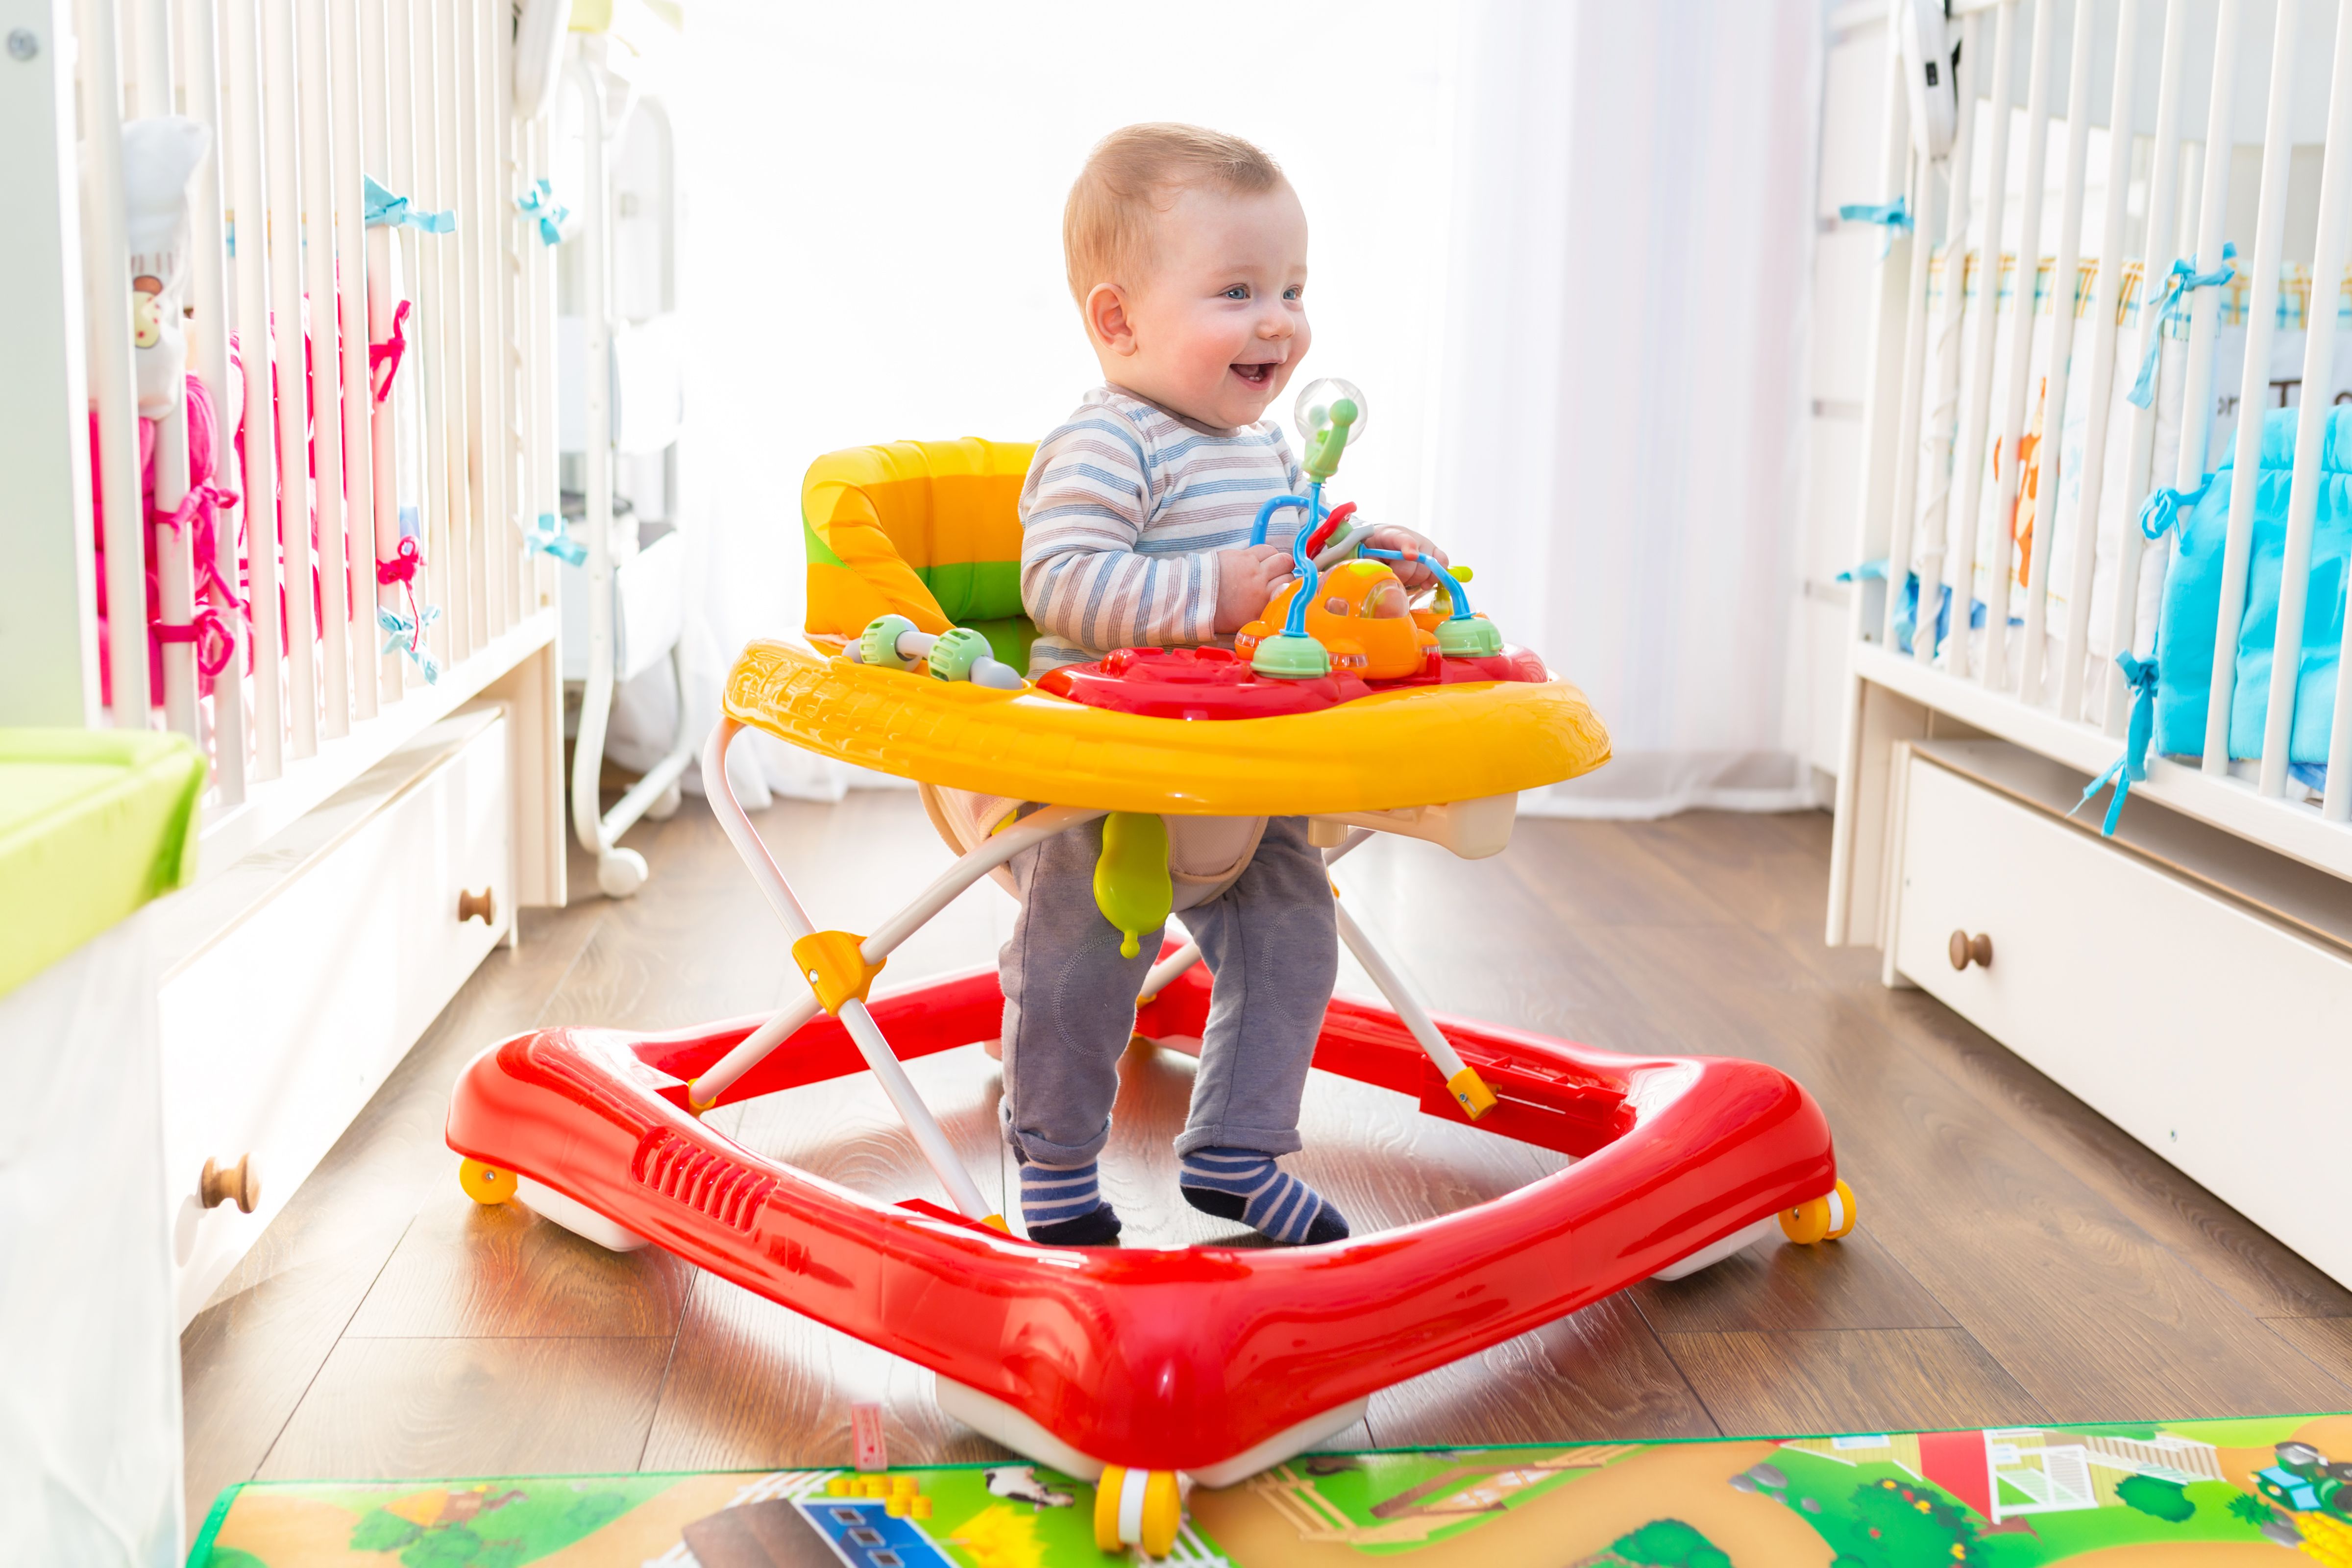 More than 9,000 US children are injured by infant walkers every year, study  finds